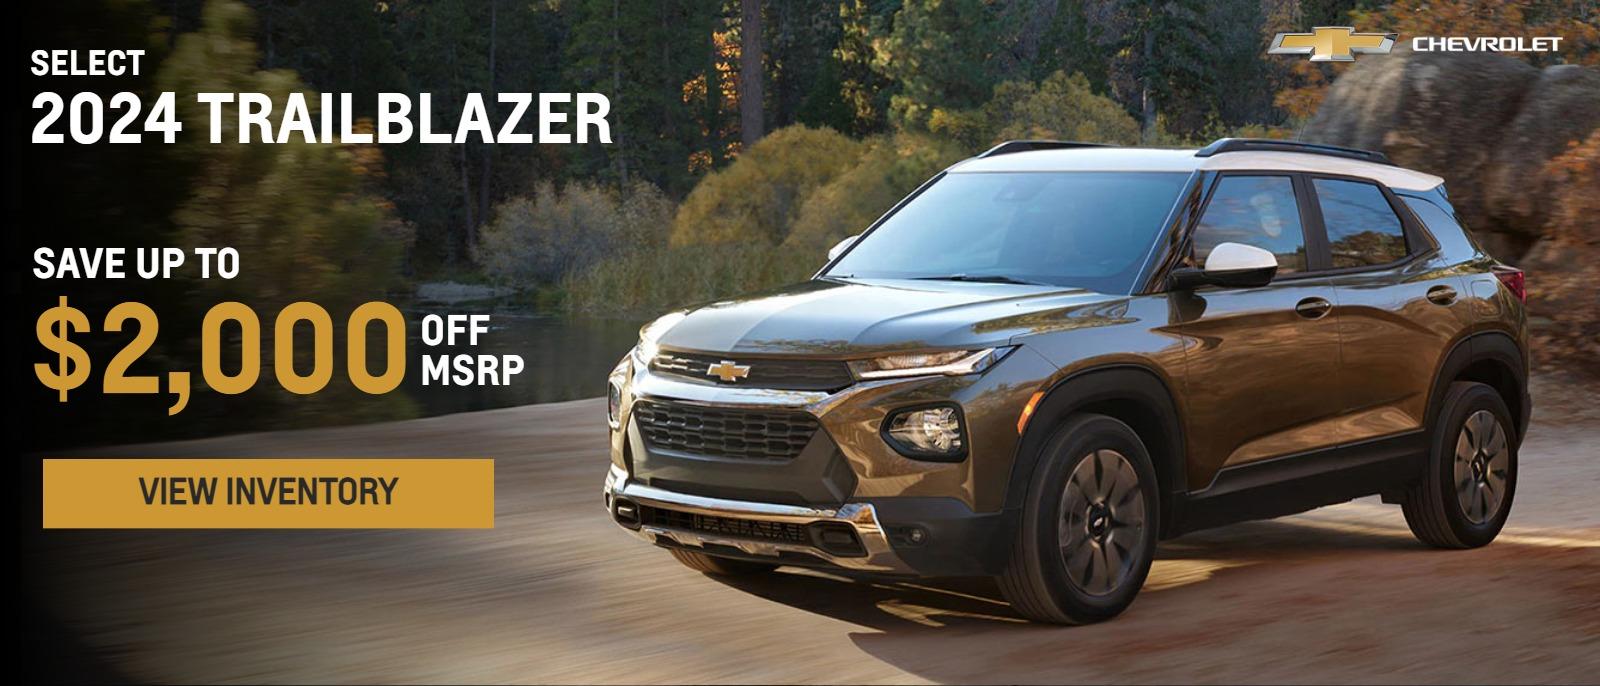 SELECT 2024 TRAILBLAZER
SAVE UP TO $2,000 OFF MSRP